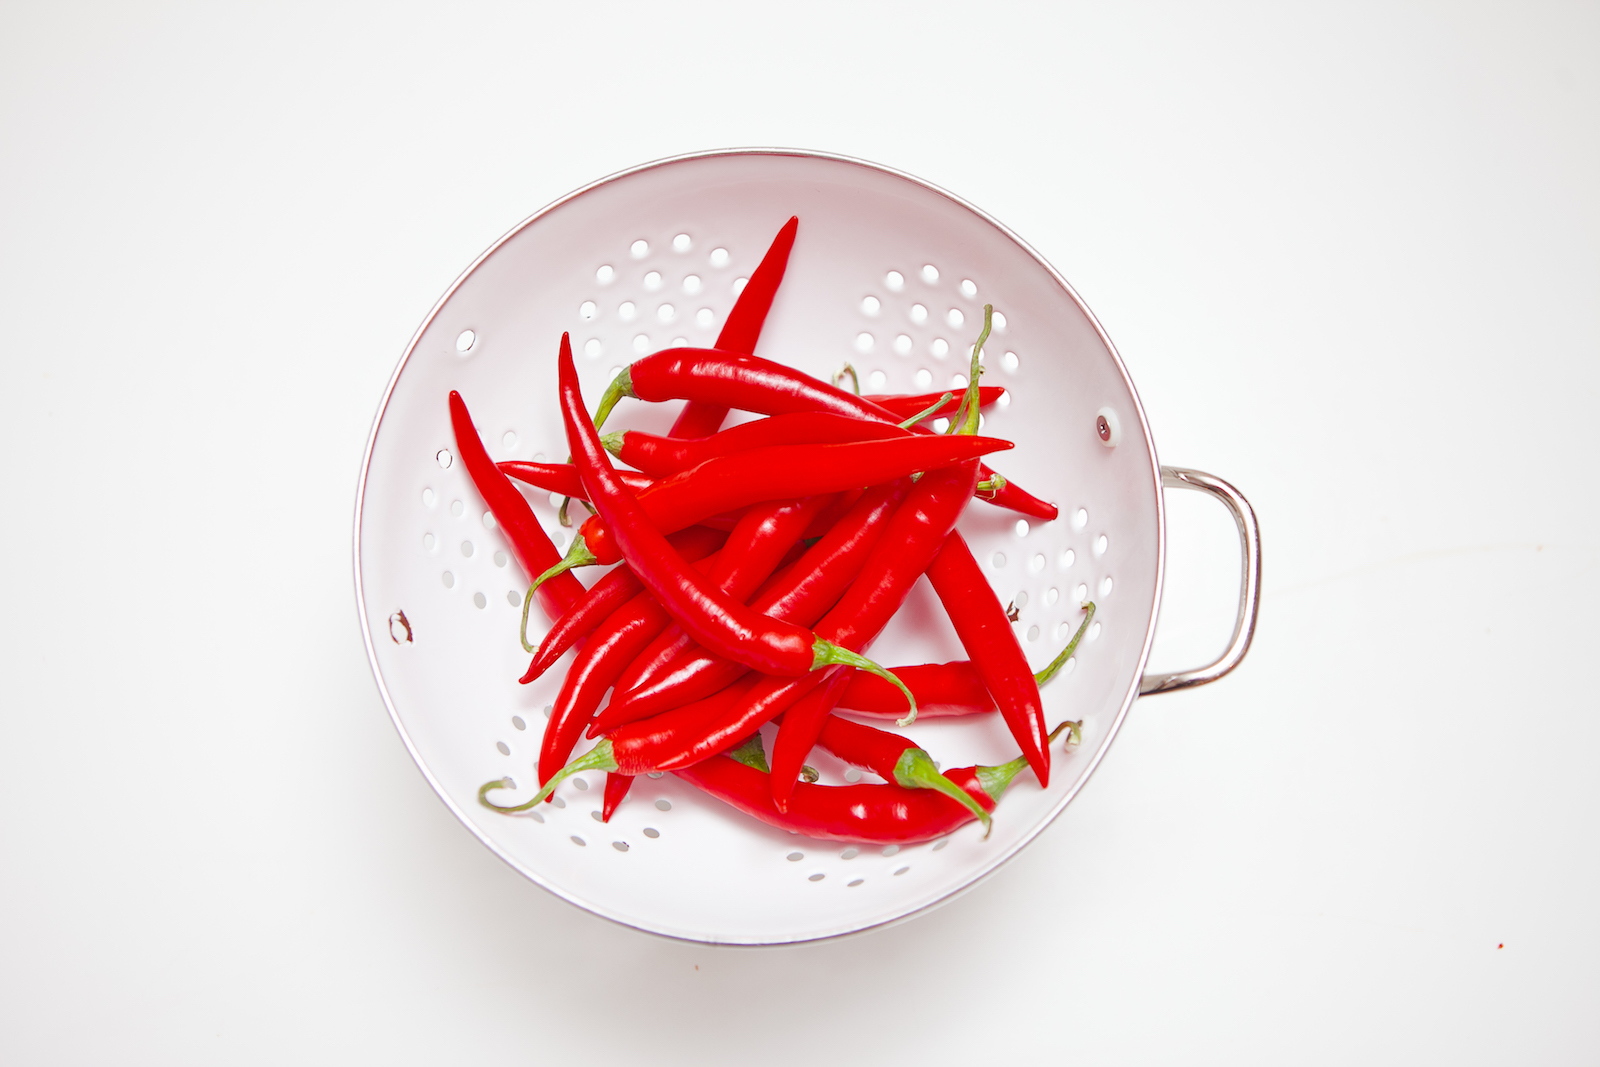 White colander with whole chillis in it against a white background